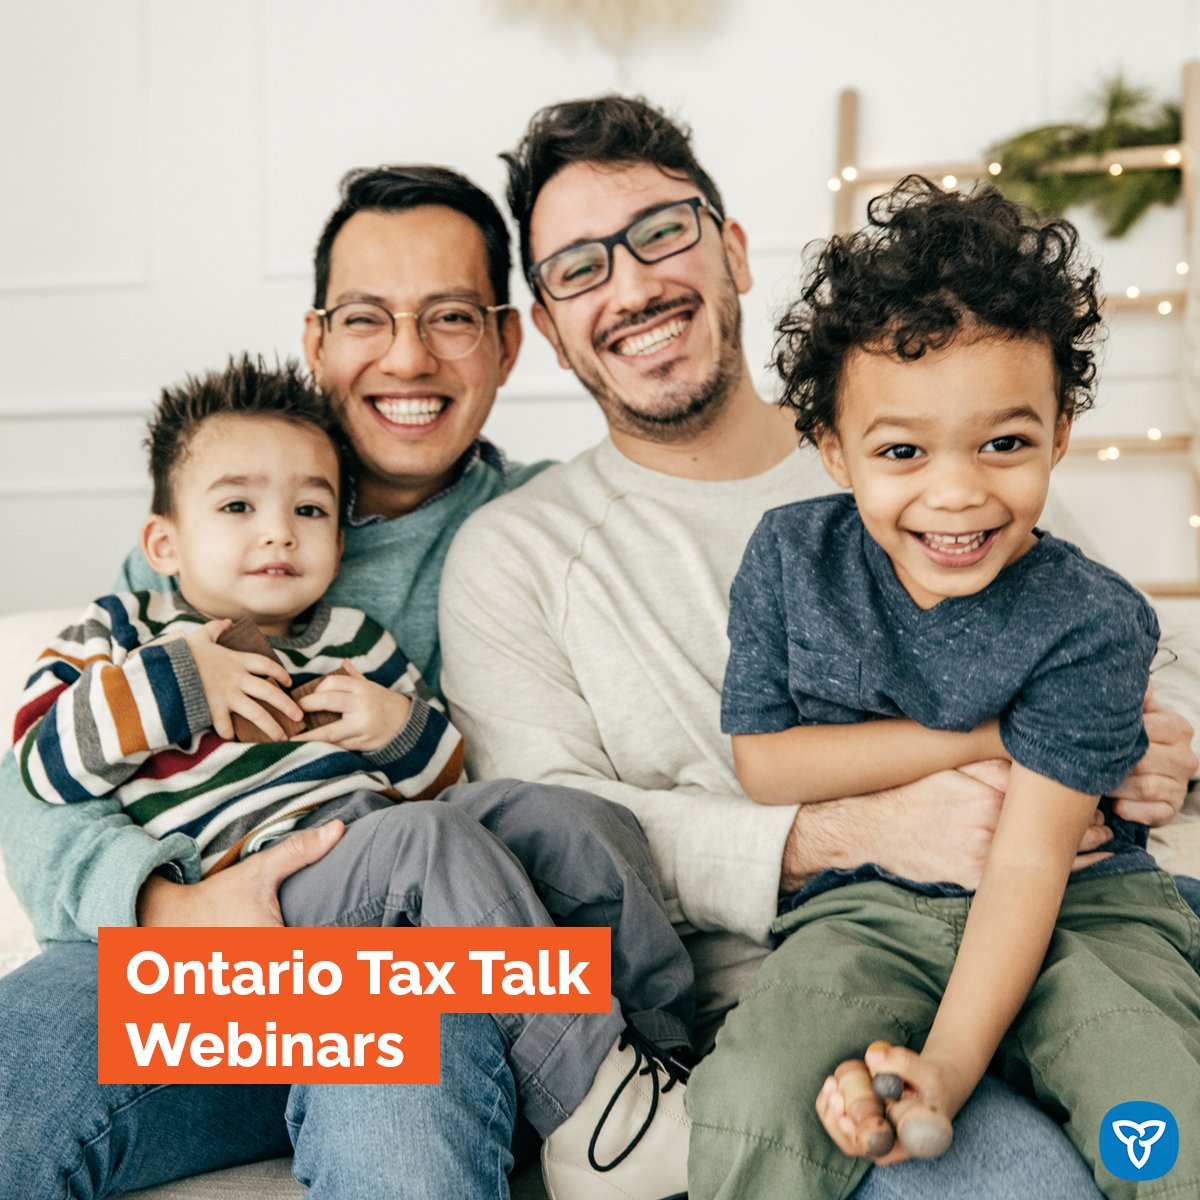 Attention parents: you may be eligible for tax credits and benefits. Join the Ontario Ministry of Finance for a free webinar to learn how you can make the most from your tax return this year: ontario.ca/document/ontar… @ONeducation @ChildrenON #TaxSeason